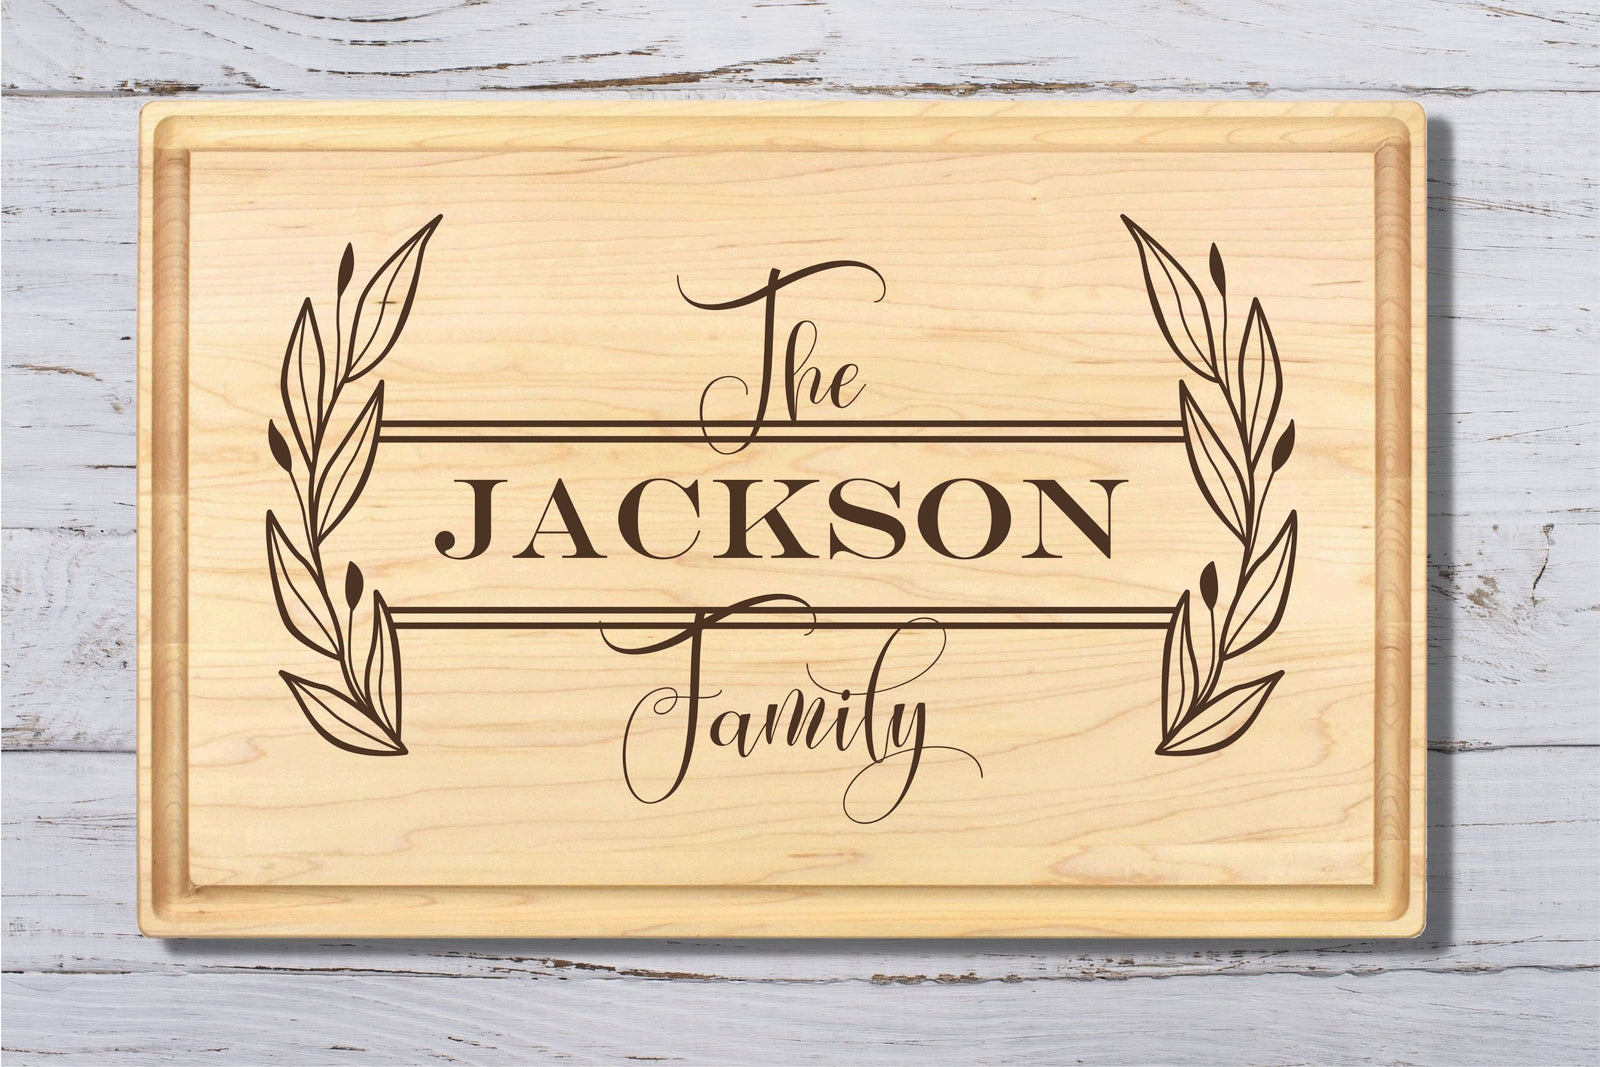 Engraved Cutting Boards: Personalized and Functional Kitchen Masterpieces